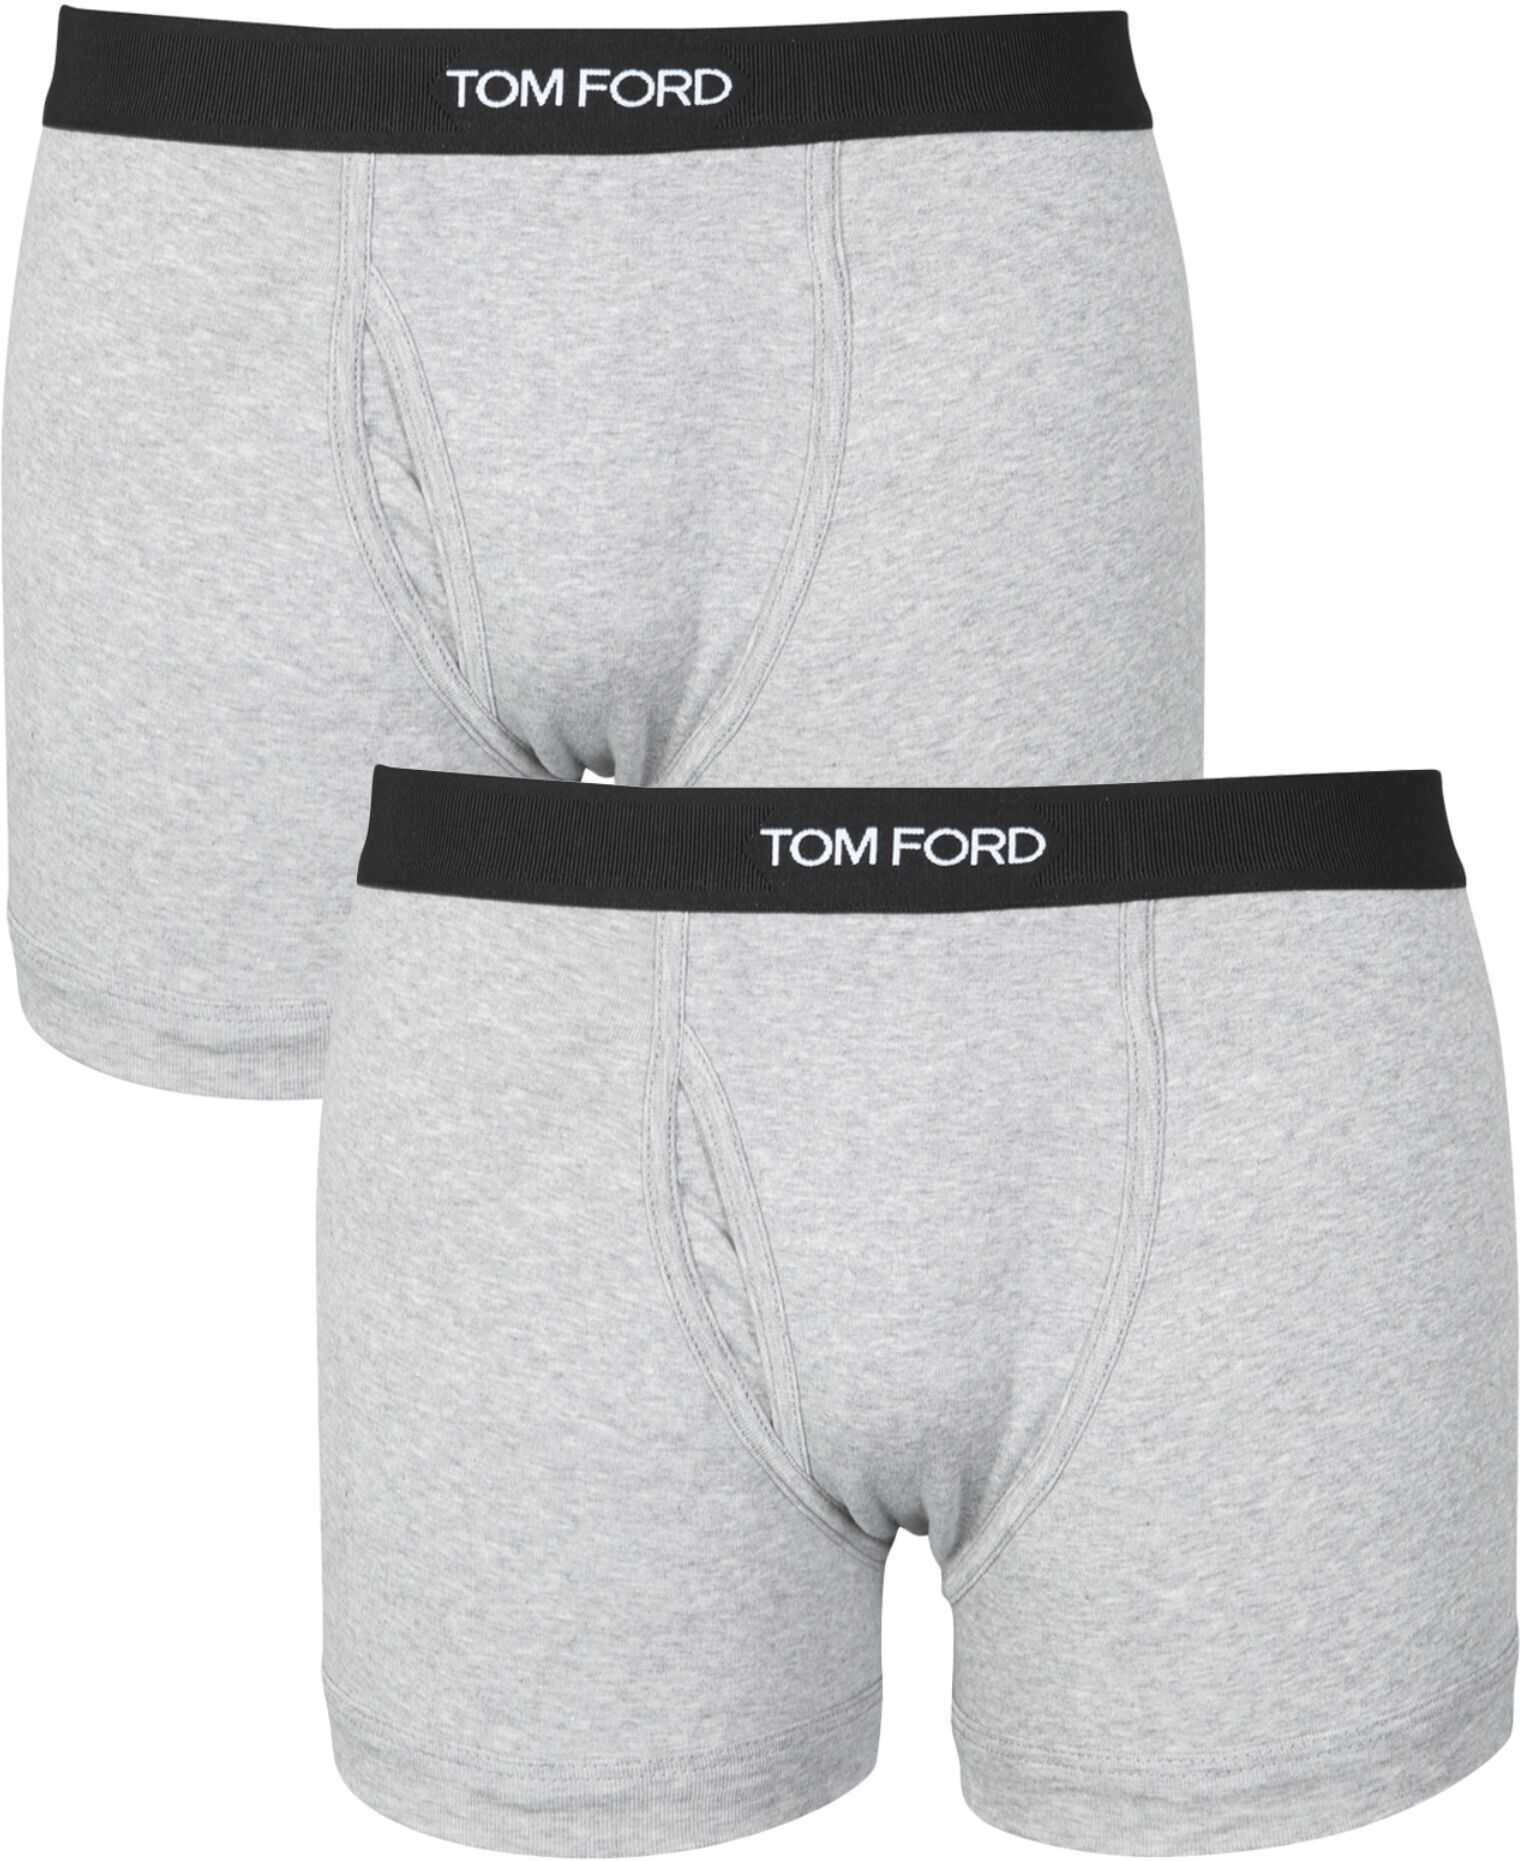 Tom Ford Pack Of Two Boxers T4XC31040_020 GREY